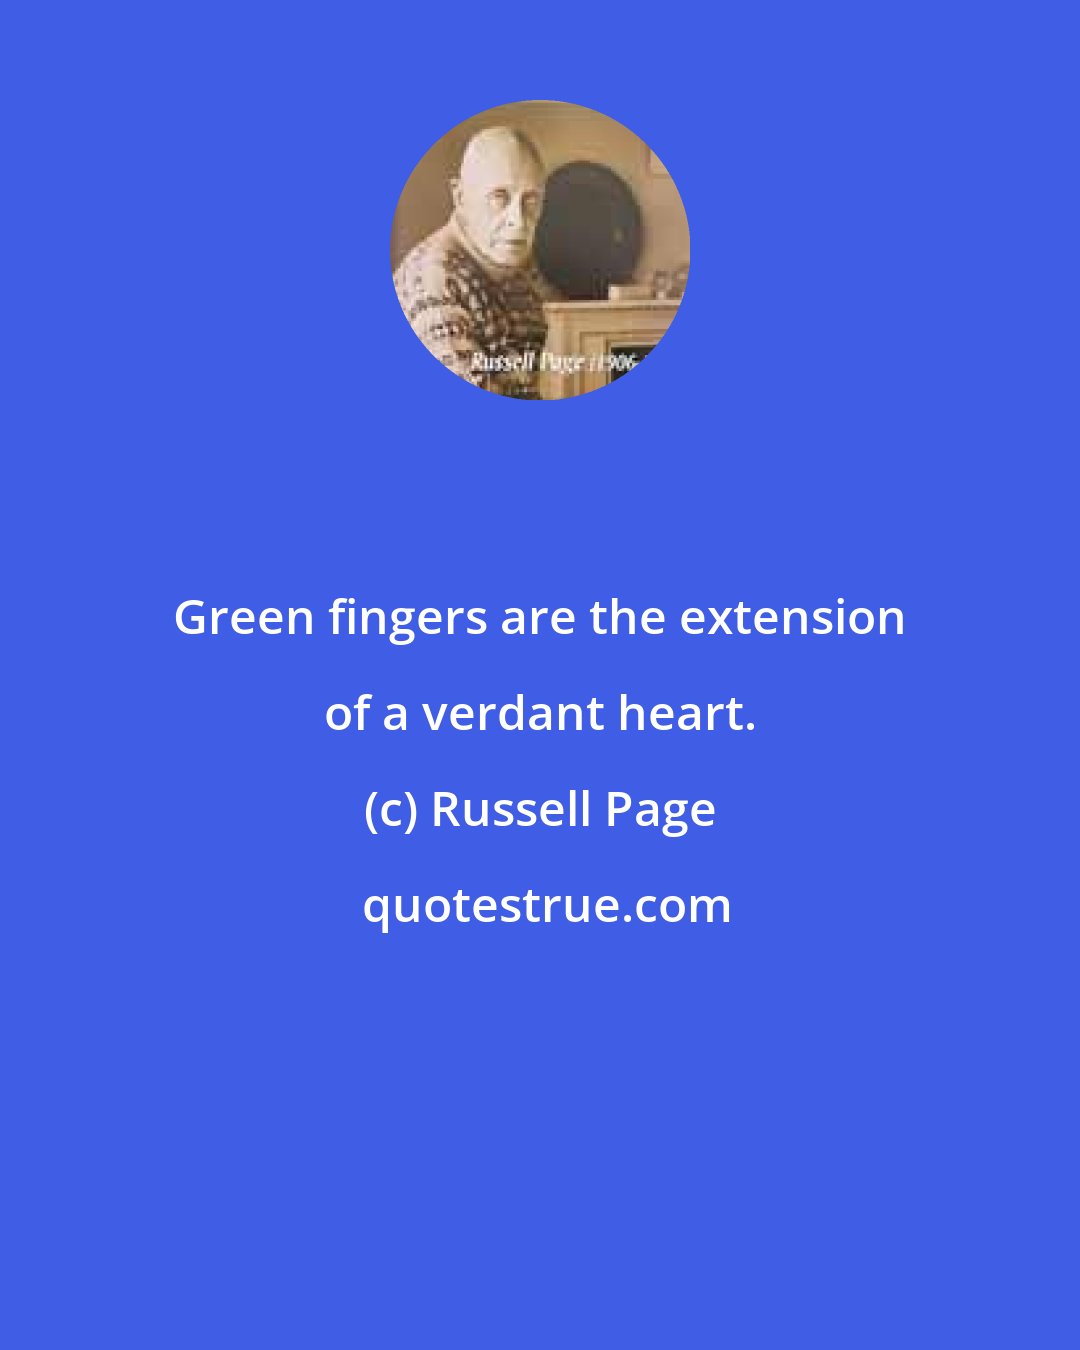 Russell Page: Green fingers are the extension of a verdant heart.